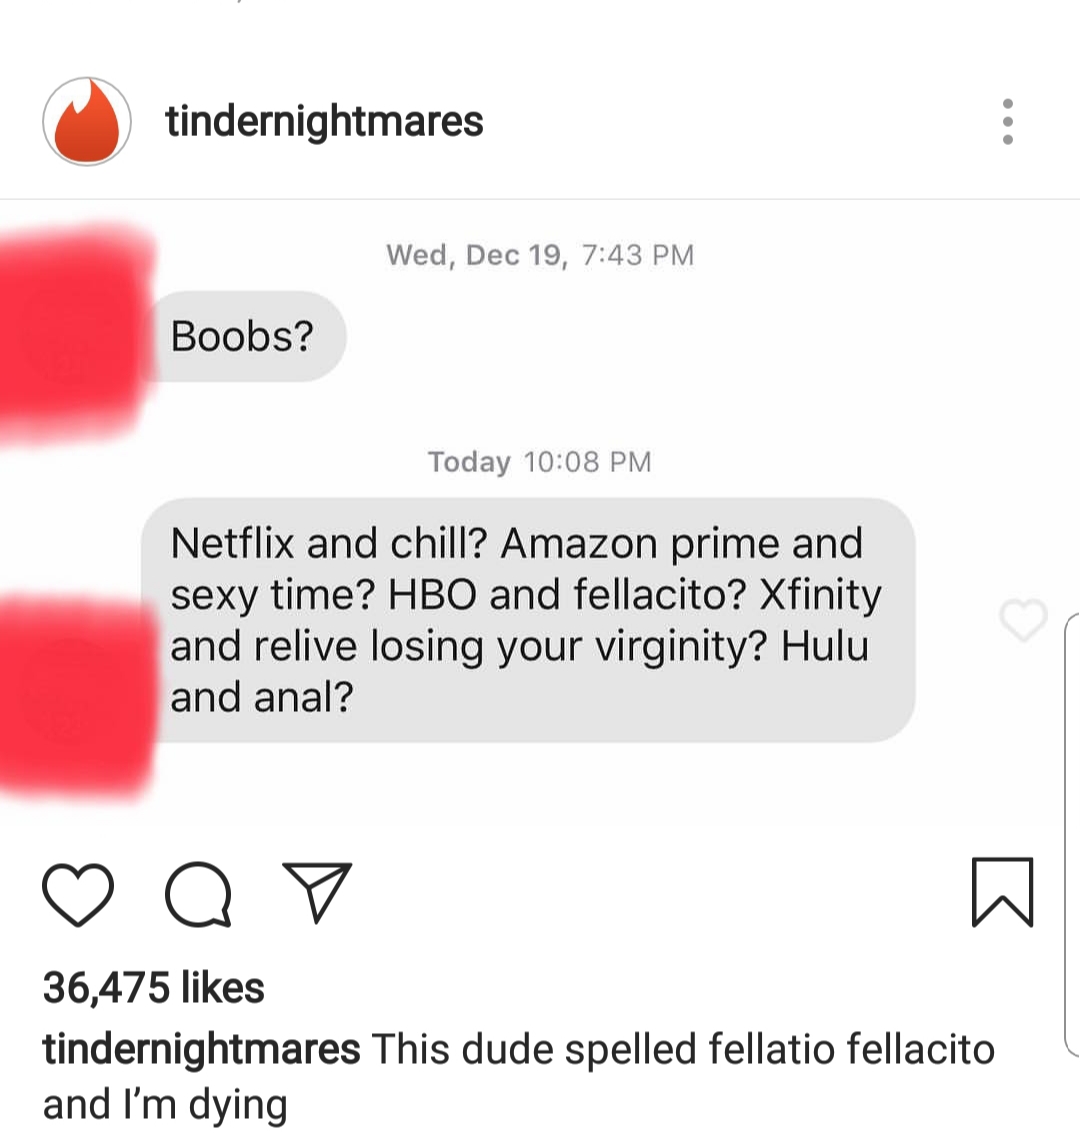 memes - tindernightmares Wed, Dec 19, Boobs? Today Netflix and chill? Amazon prime and sexy time? Hbo and fellacito? Xfinity and relive losing your virginity? Hulu and anal? Op 36,475 tindernightmares This dude spelled fellatio fellacito and I'm dying